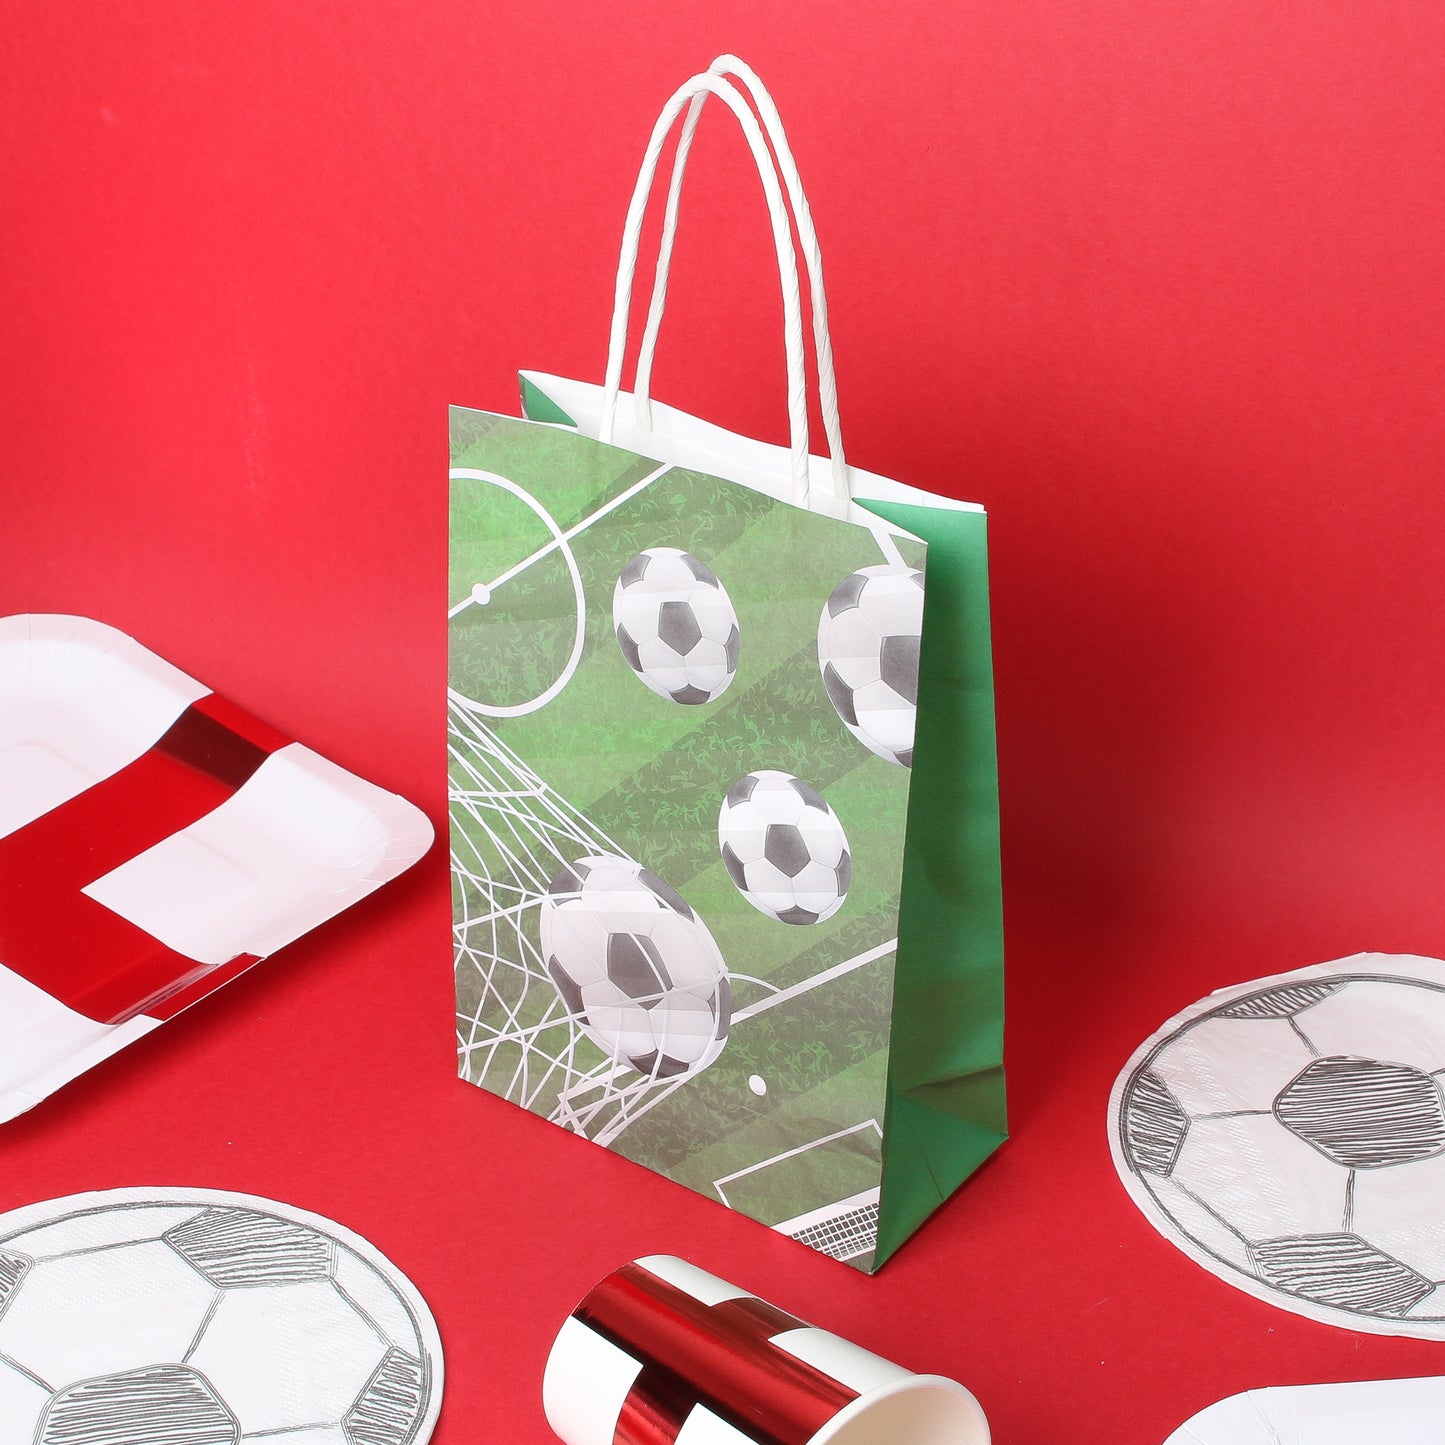 Football Paper Bag with Handles